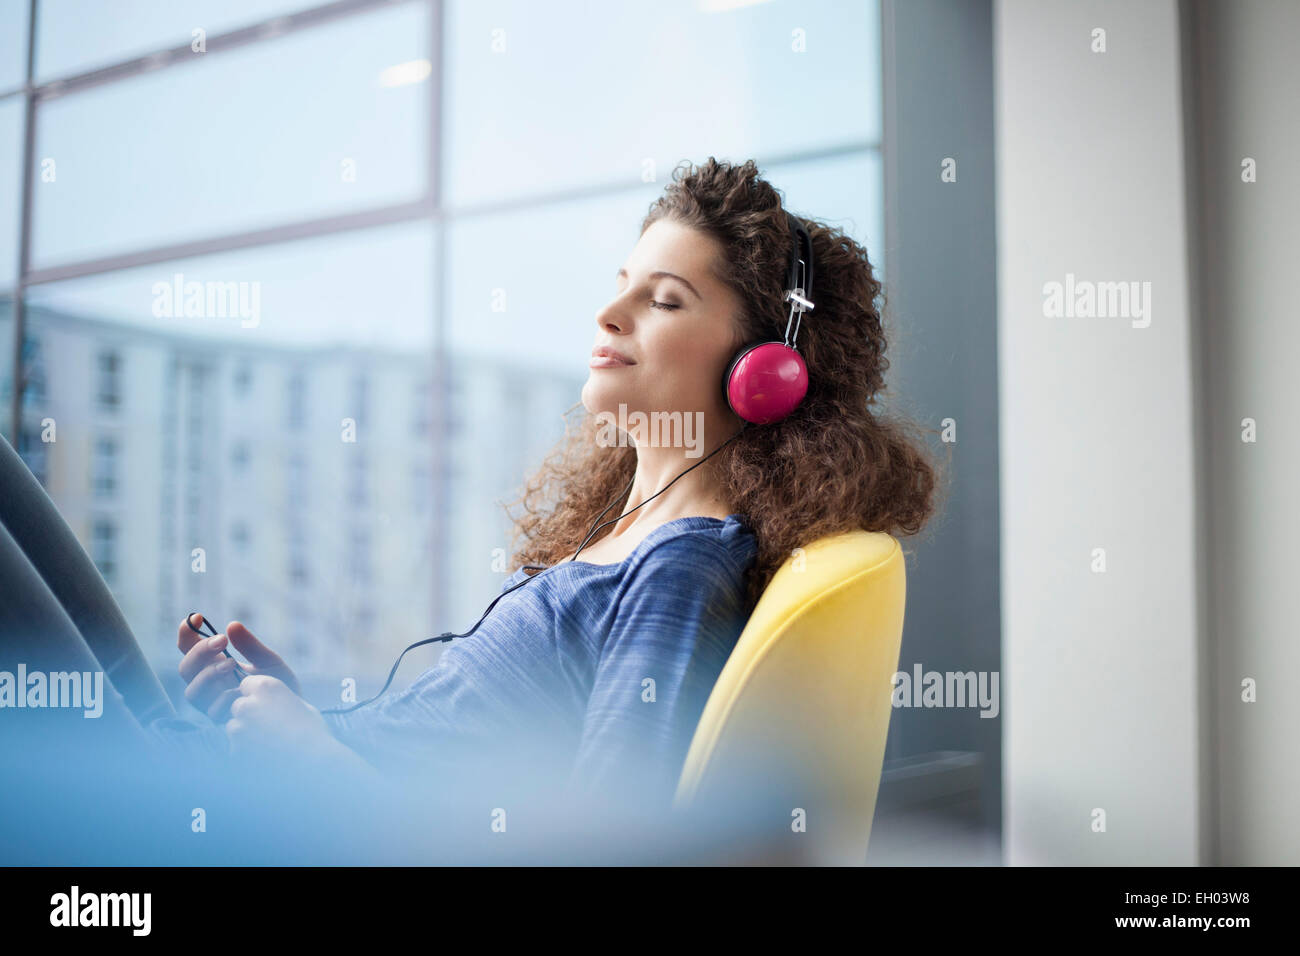 Young woman wearing headphones at the window Stock Photo